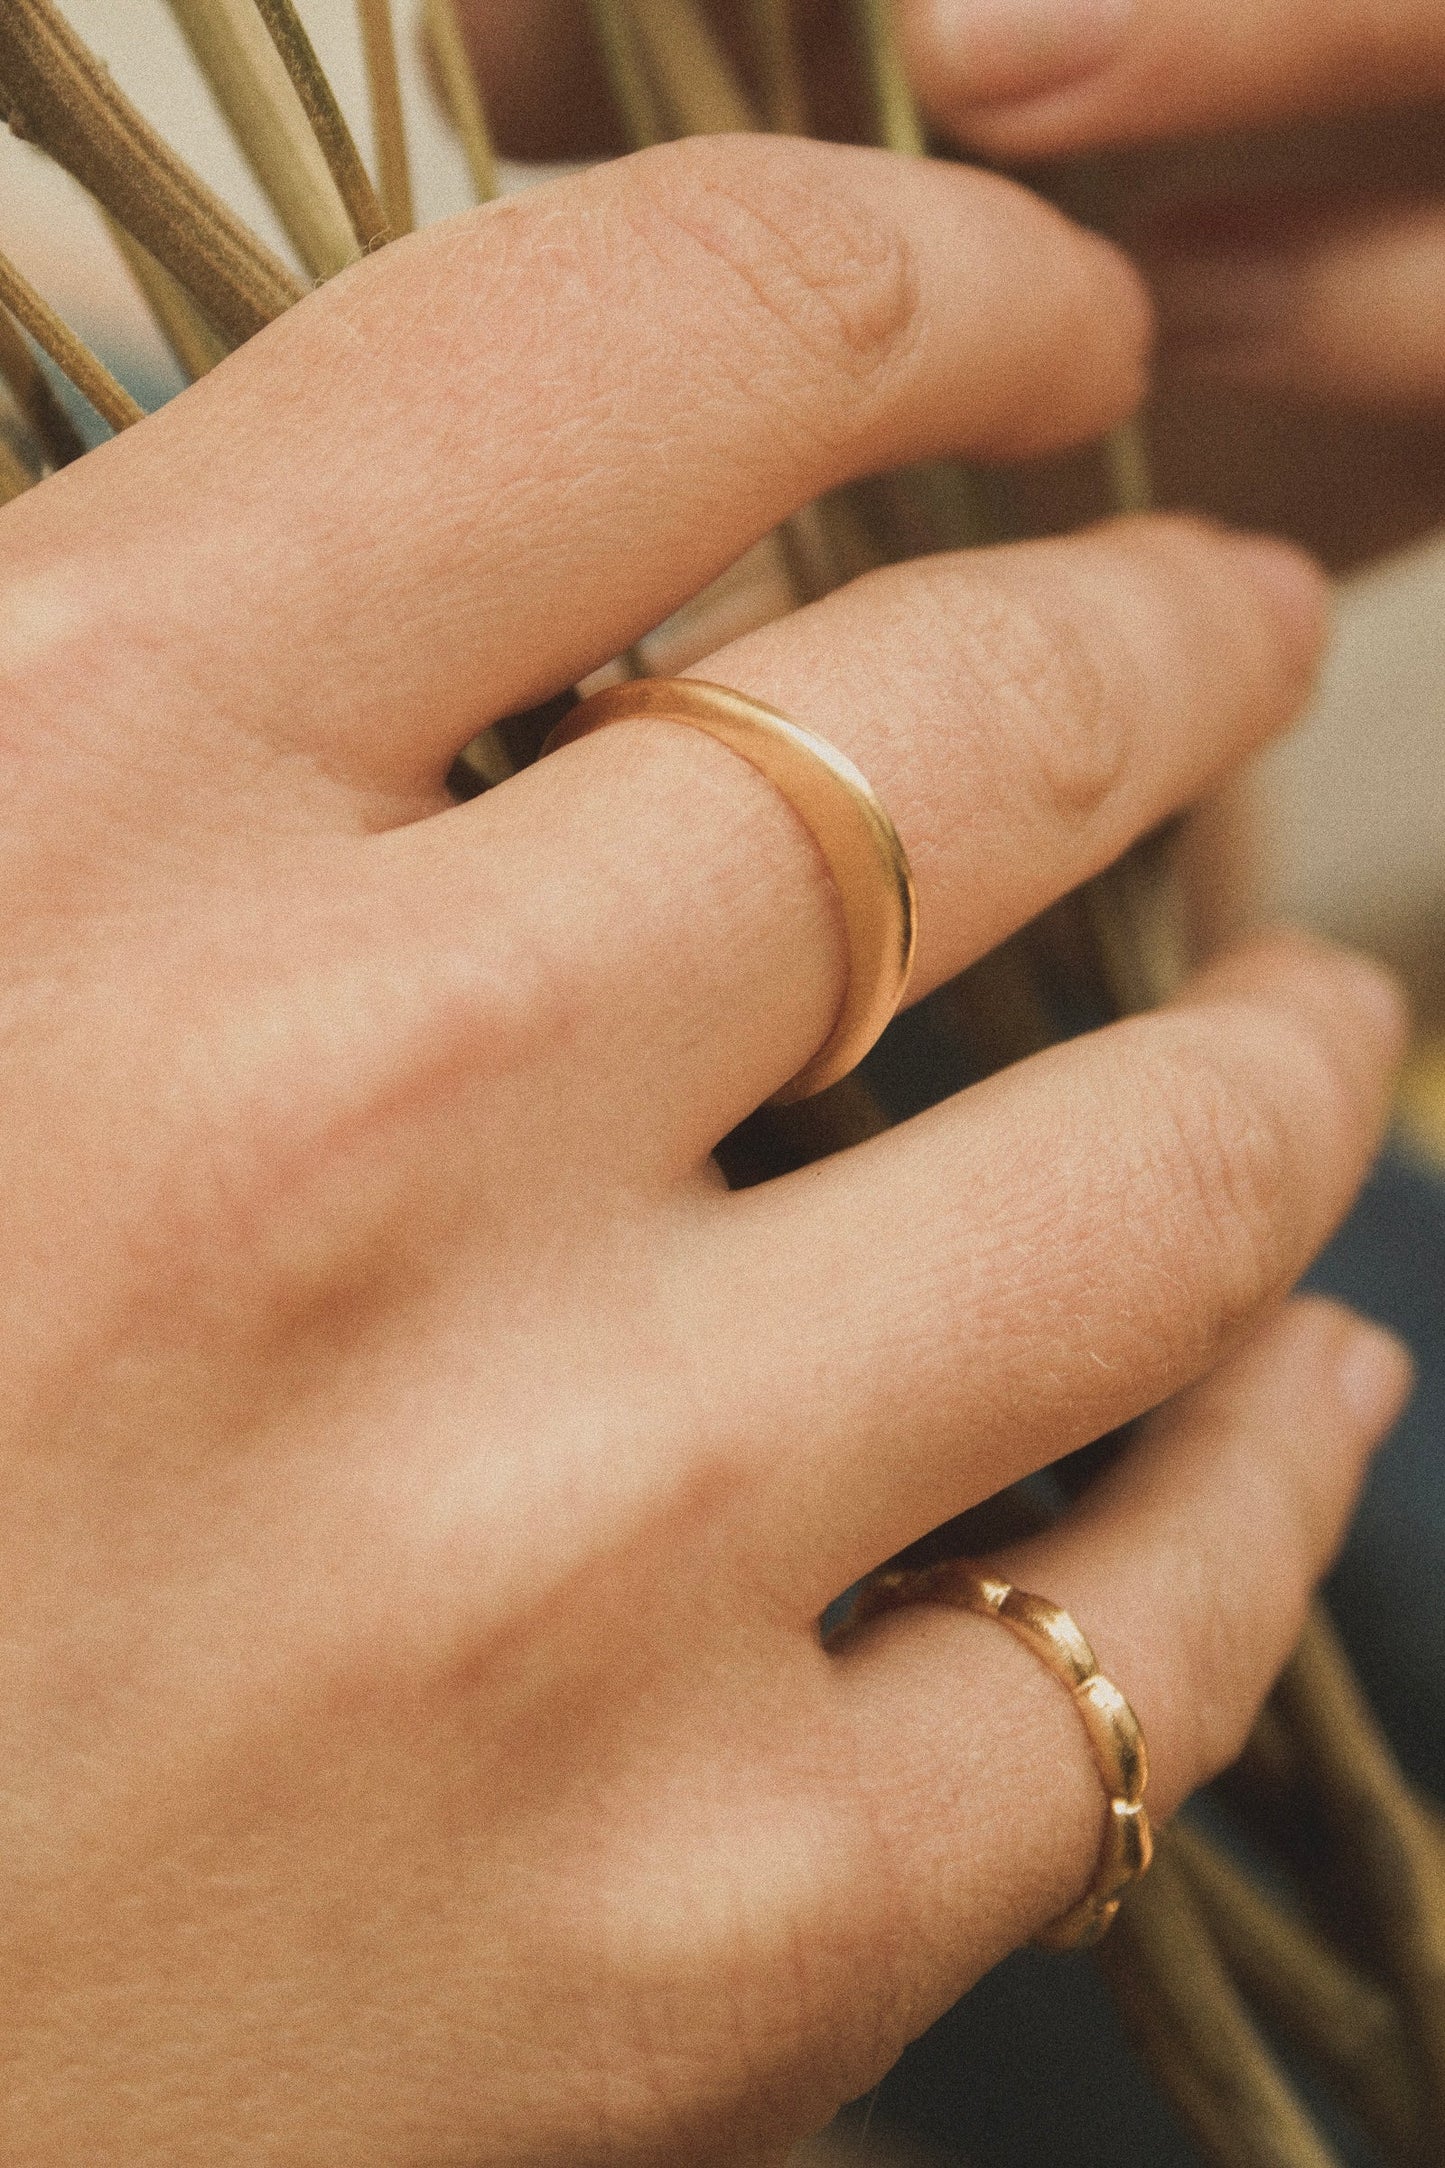 Ojai Ring by Mountainside Jewelry. This sleek and sculptural hand-carved design is a true standout when worn alone, or stacked with your other favorites. Perfect worn alone, to compliment other ring styles, or stacked with other pieces. Handmade in the Santa Cruz Mountains.